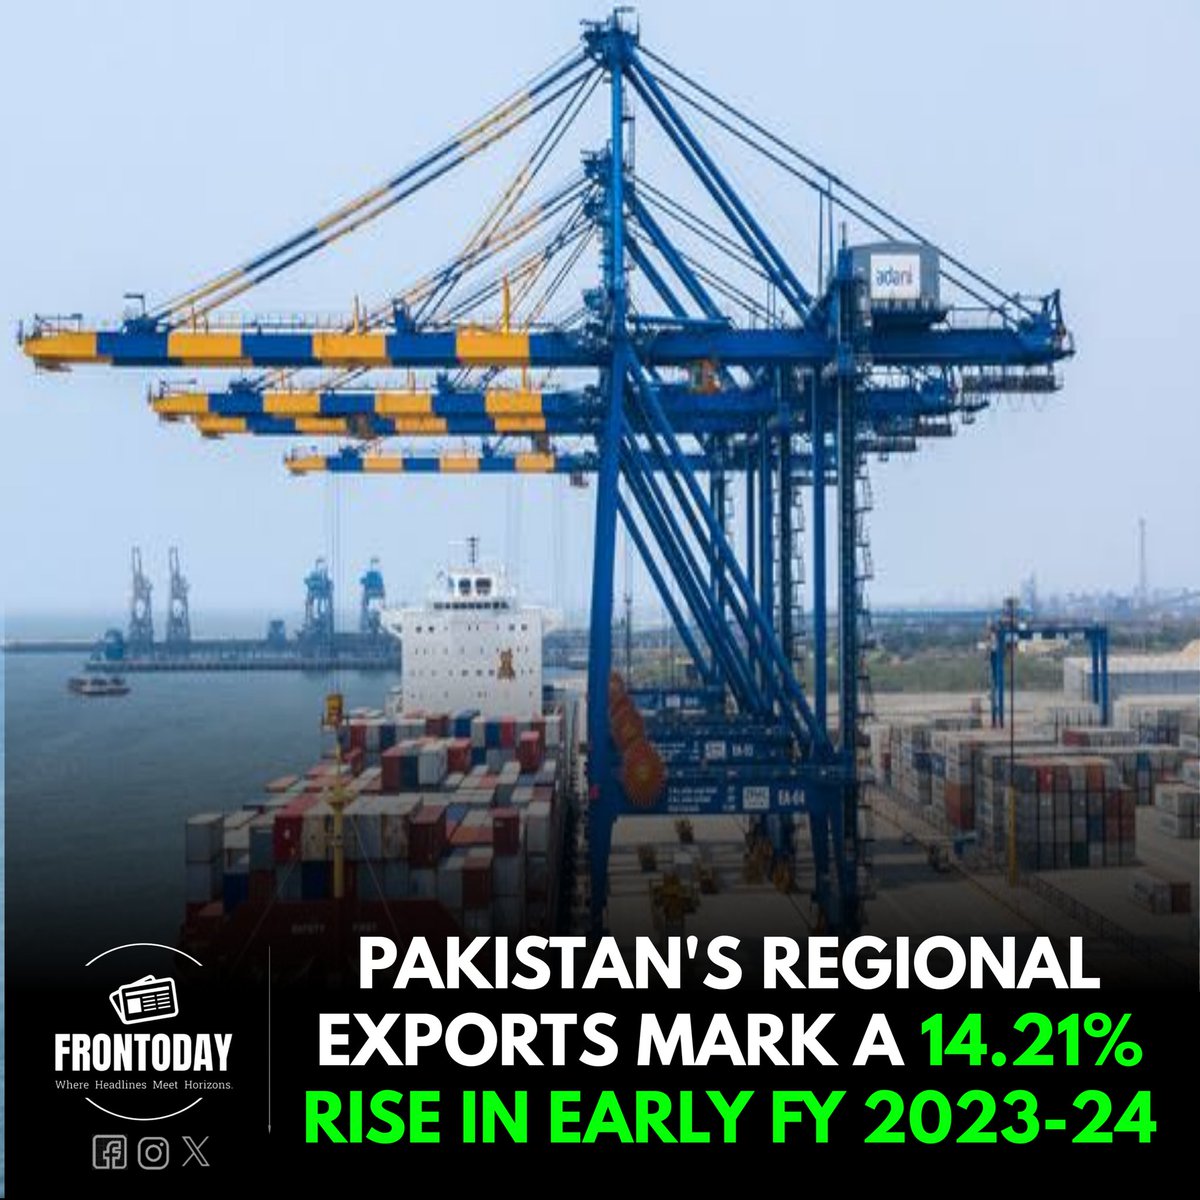 Economic Update: Pakistan's regional exports jump by 14.21% in the first four months of FY 2023-24! 📈 Led by a remarkable 40.36% surge in exports to China, this growth reaffirms Pakistan's resilience in regional trade. 🌏💼 #PakistanExports #EconomicGrowth #RegionalTrade 📊